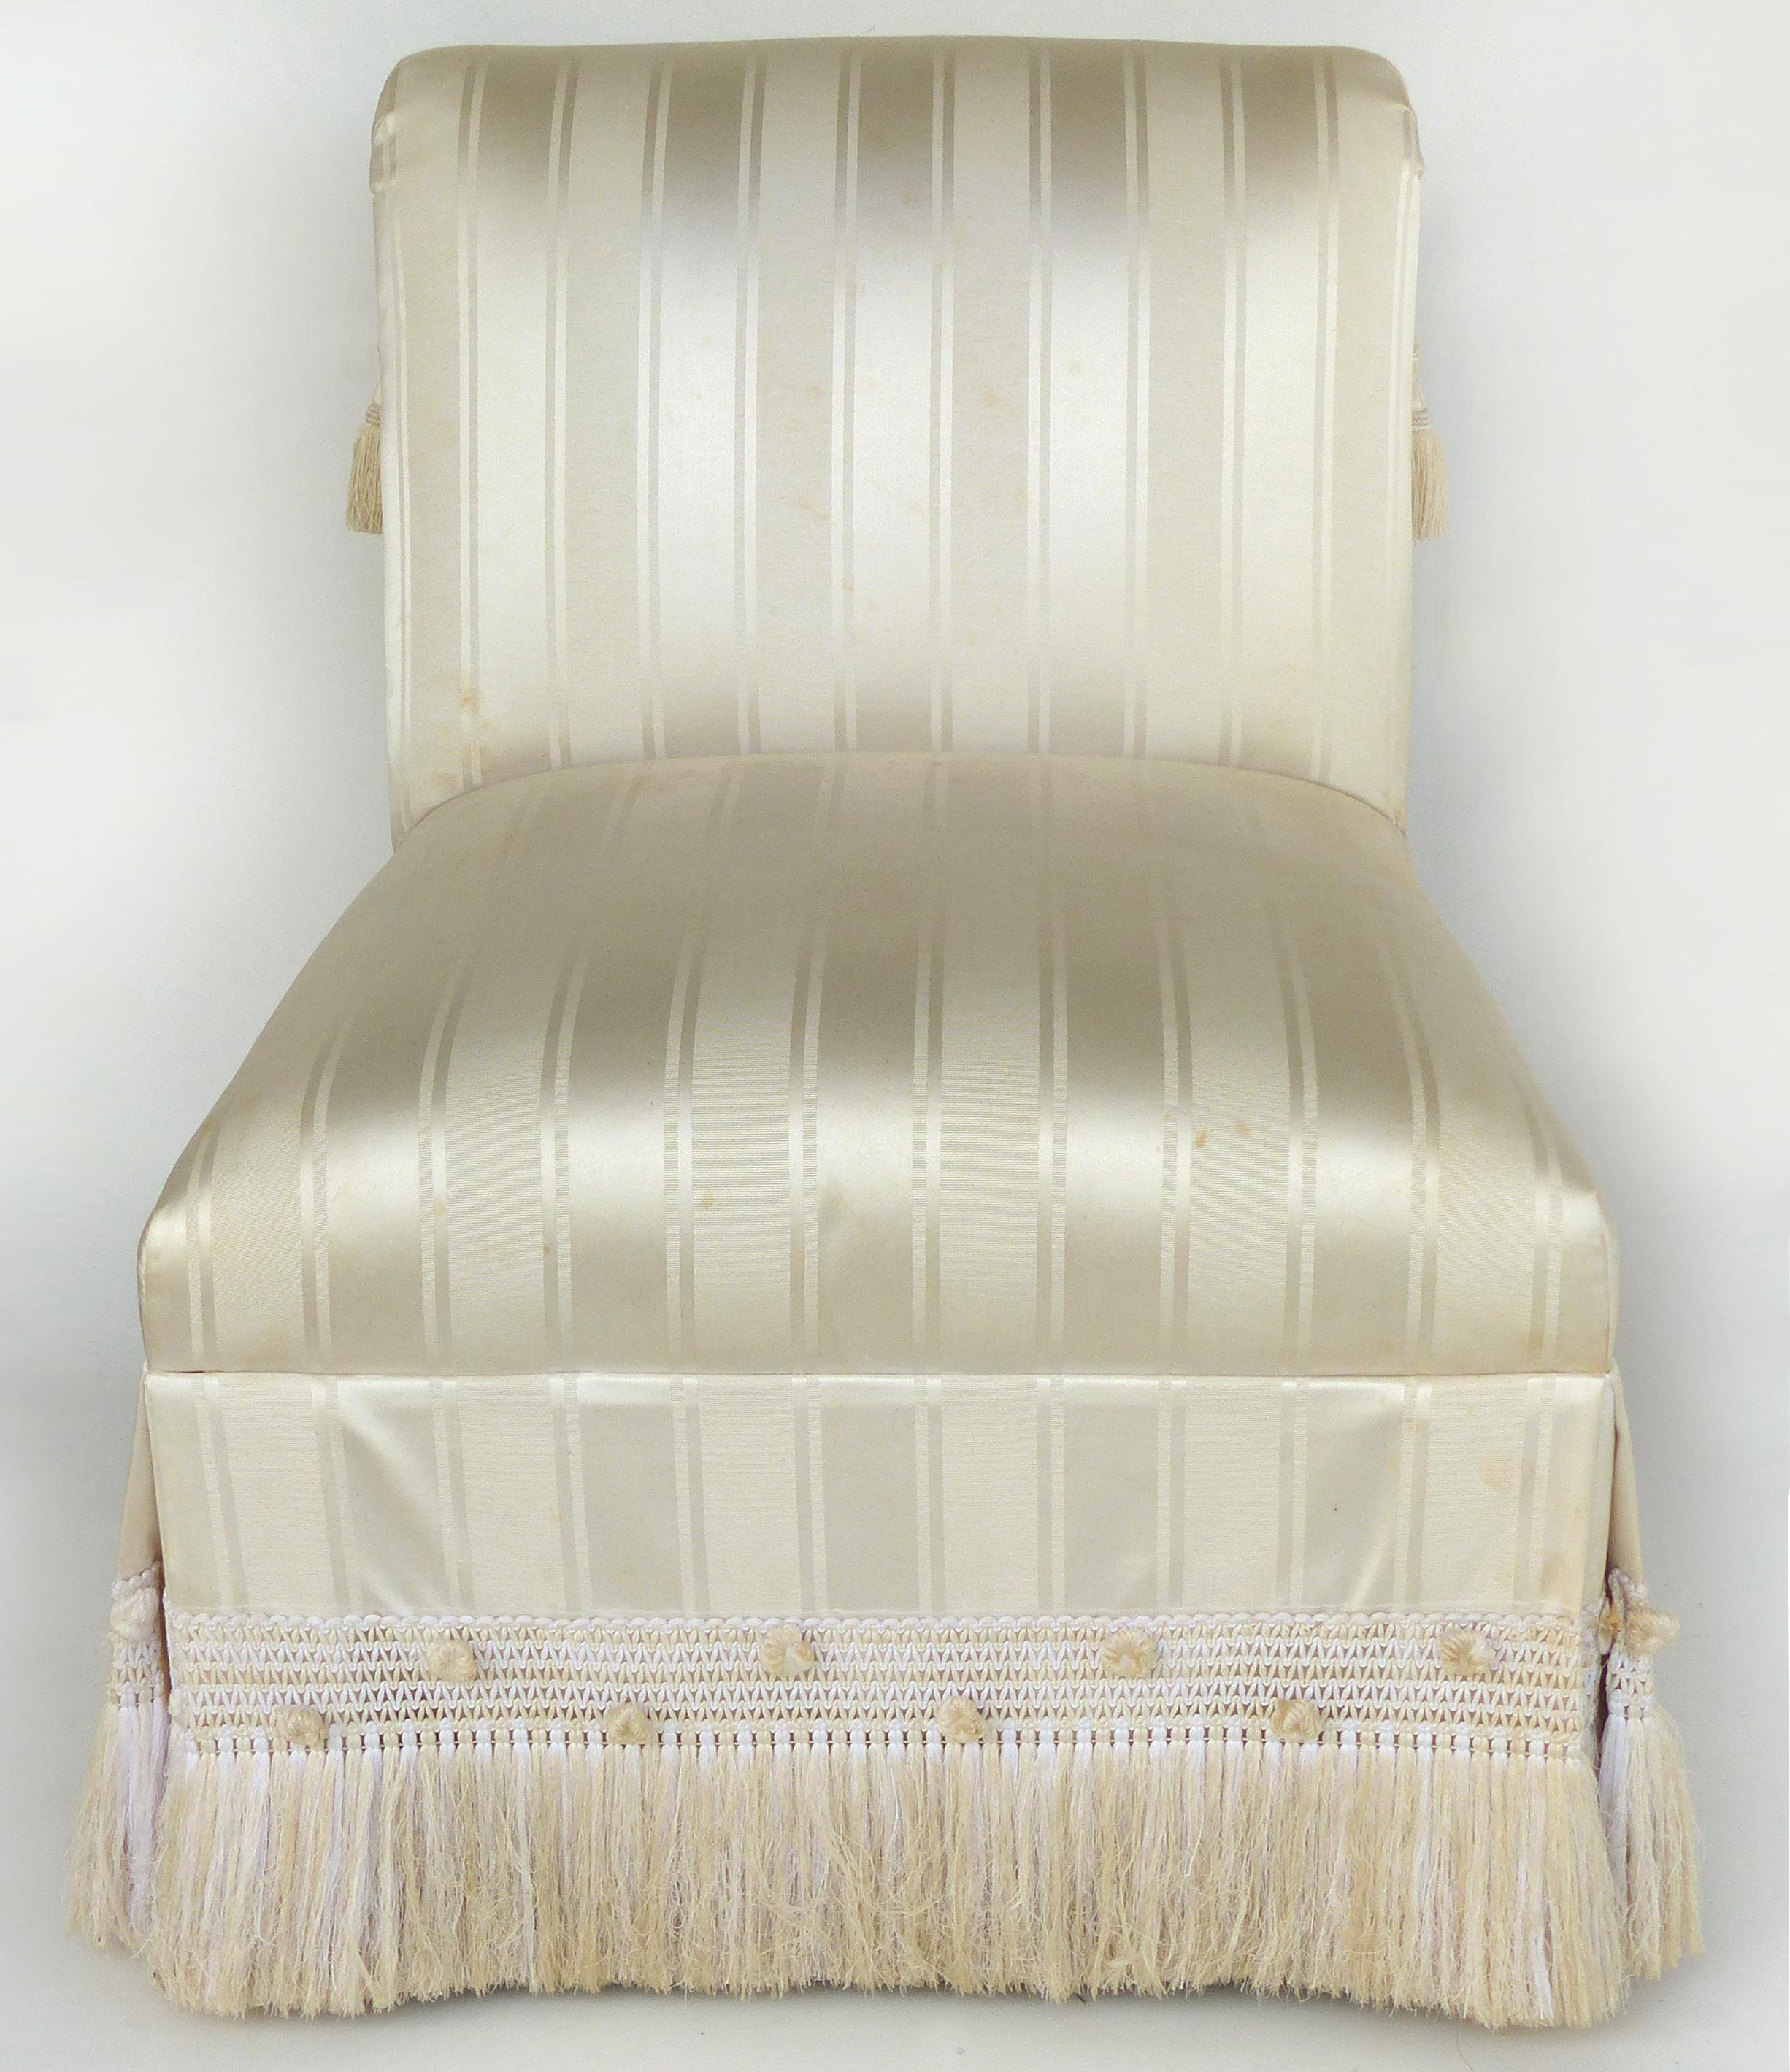 Custom Upholstered Slipper Chairs with Trim and Tassels, Pair

Offered for sale is a custom made pair of upholstered slipper chairs which require new upholstery. These elegant chairs have wonderful detailing but do show age wear to the stripped